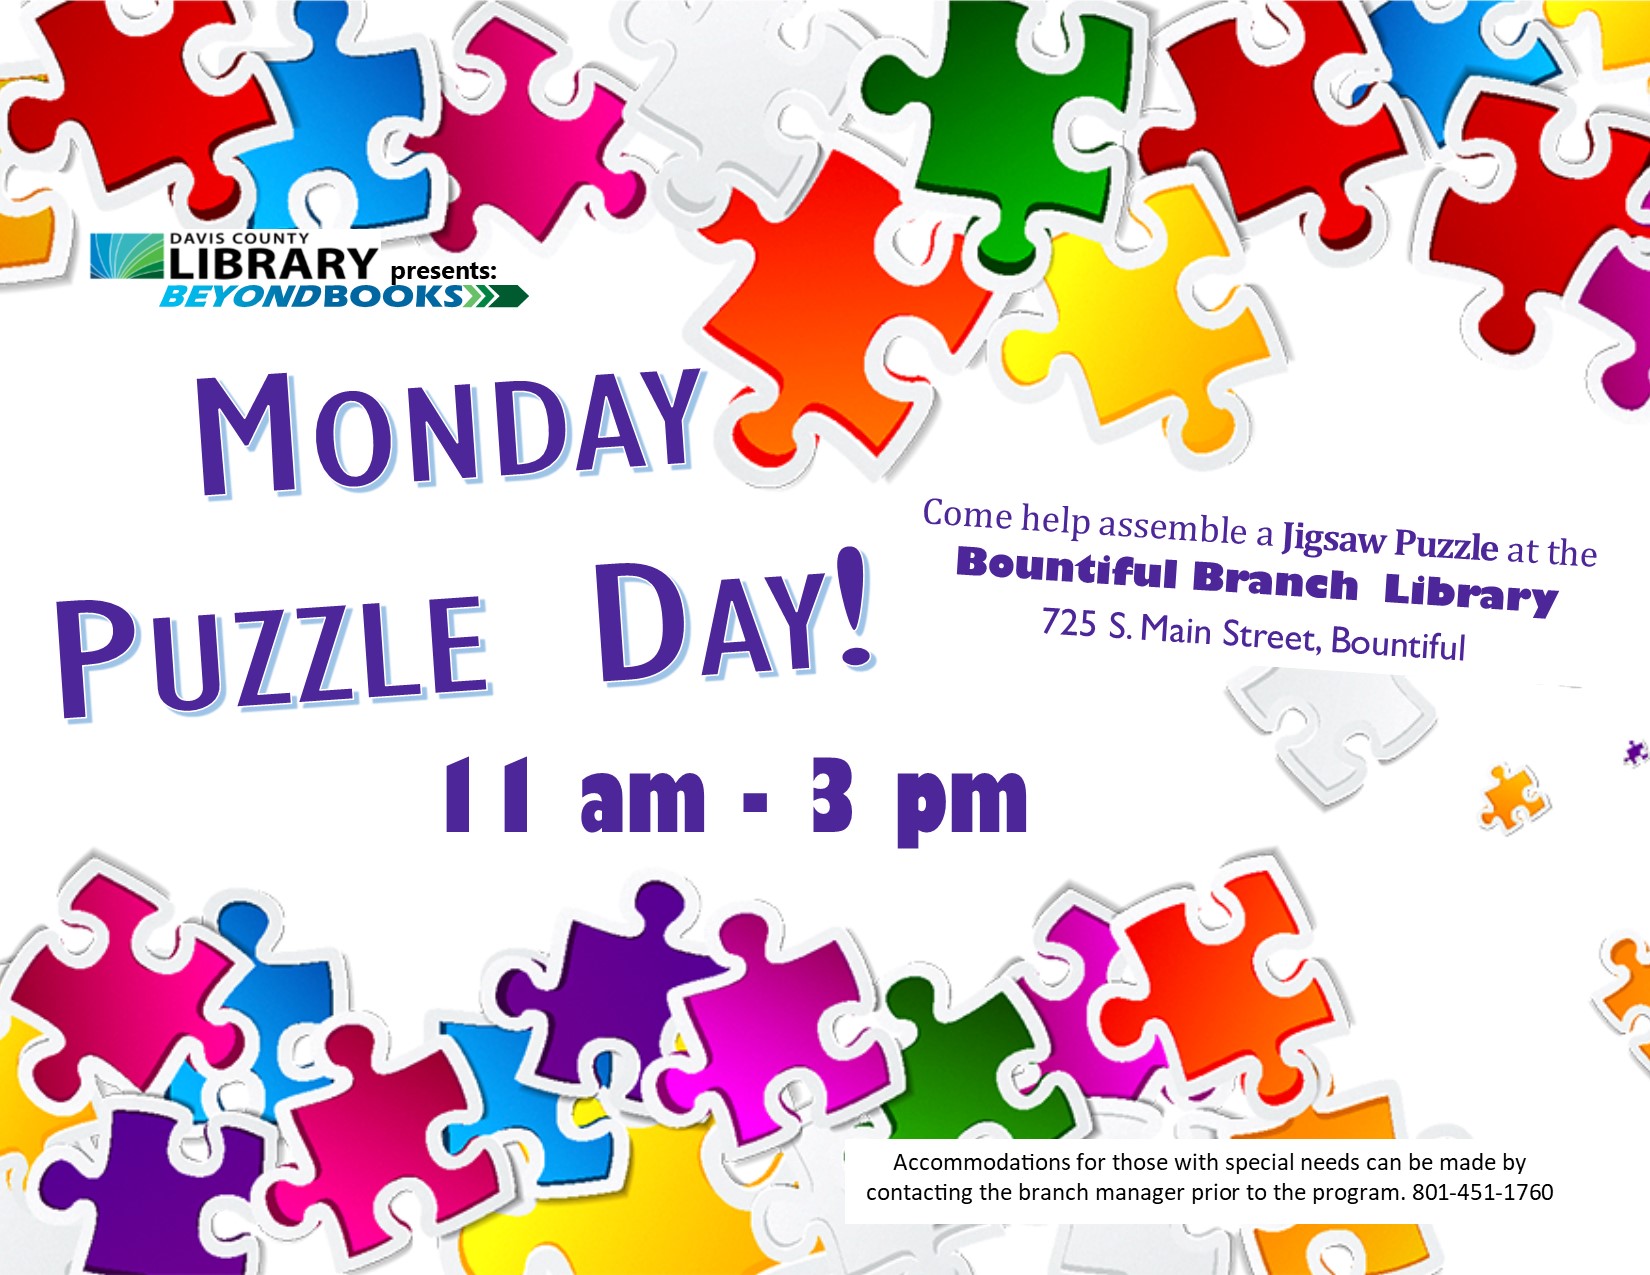 Monday Puzzle Flier. From 11am to 3pm in the upstairs area of the Bountiful Library.